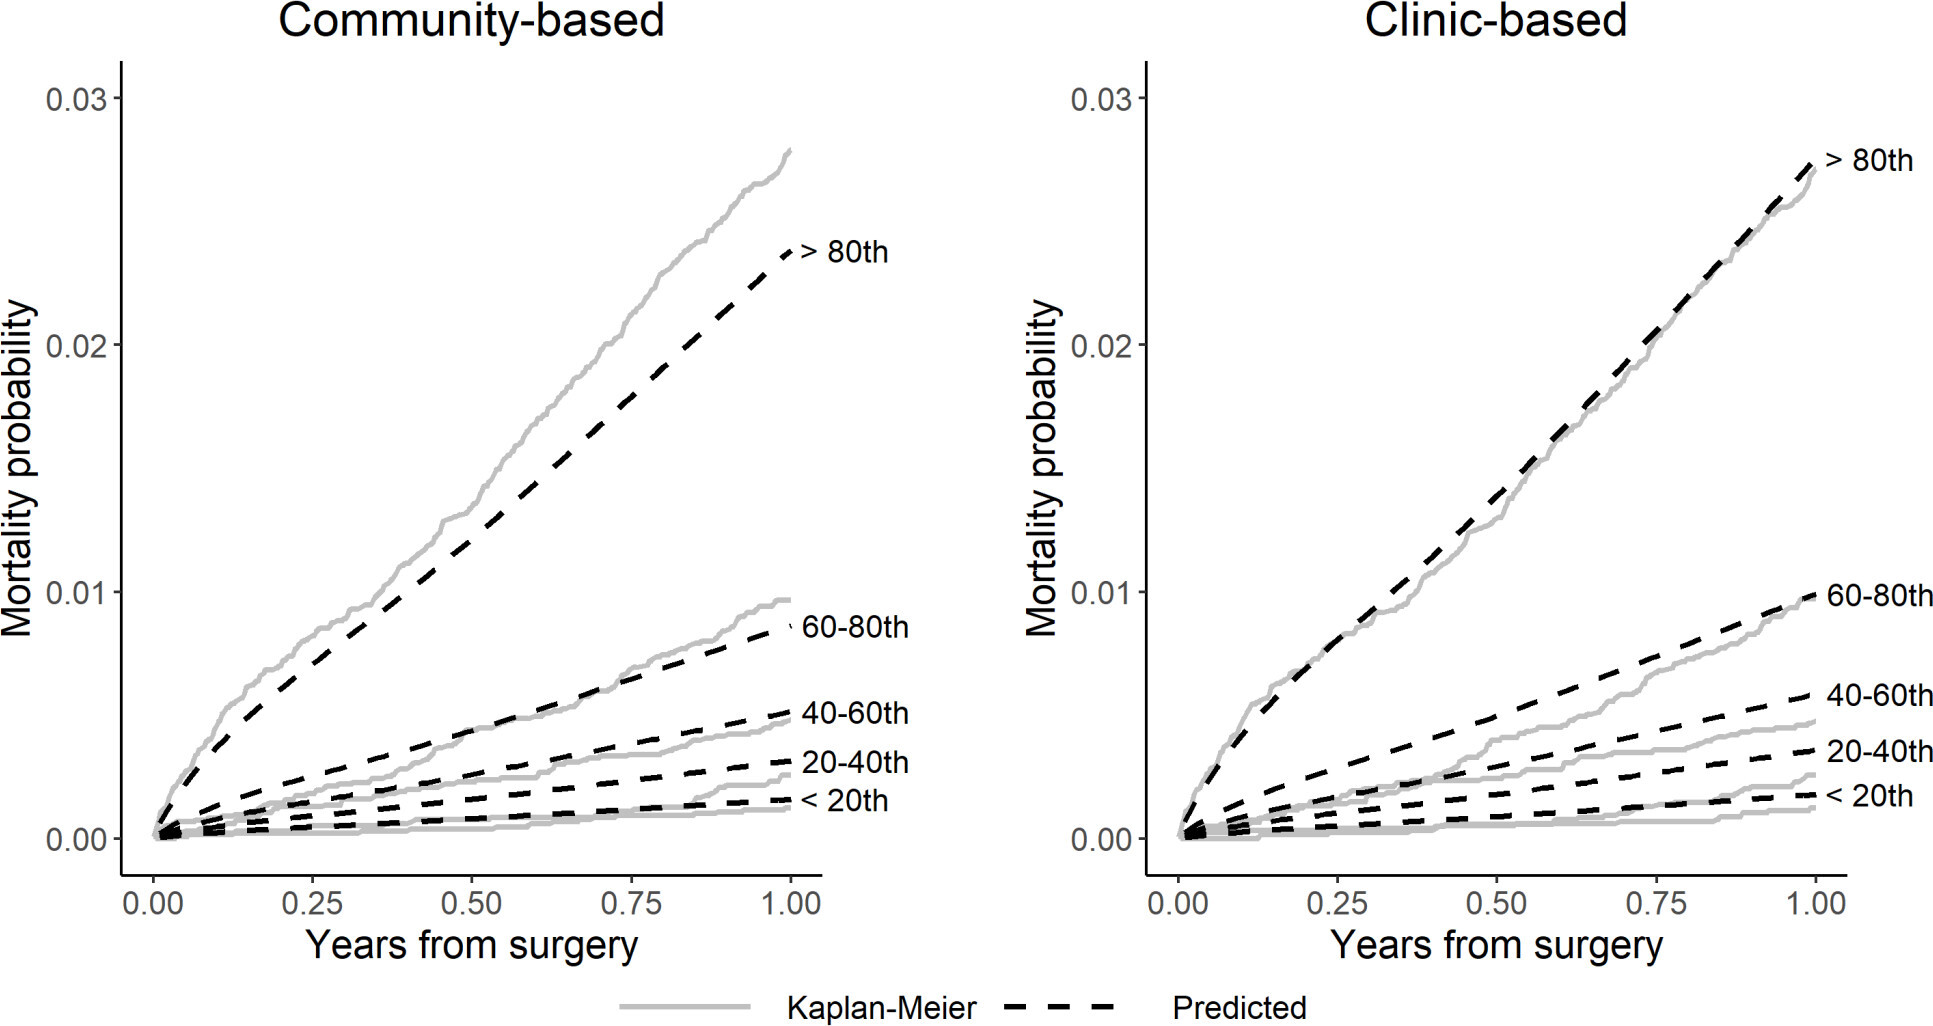 Fig. 4 
            Calibration plots comparing observed (Kaplan-Meier) versus predicted mortality by risk quintile for community-based and clinic-based hip models in Norwegian Arthroplasty Register (NAR) external validation.
          